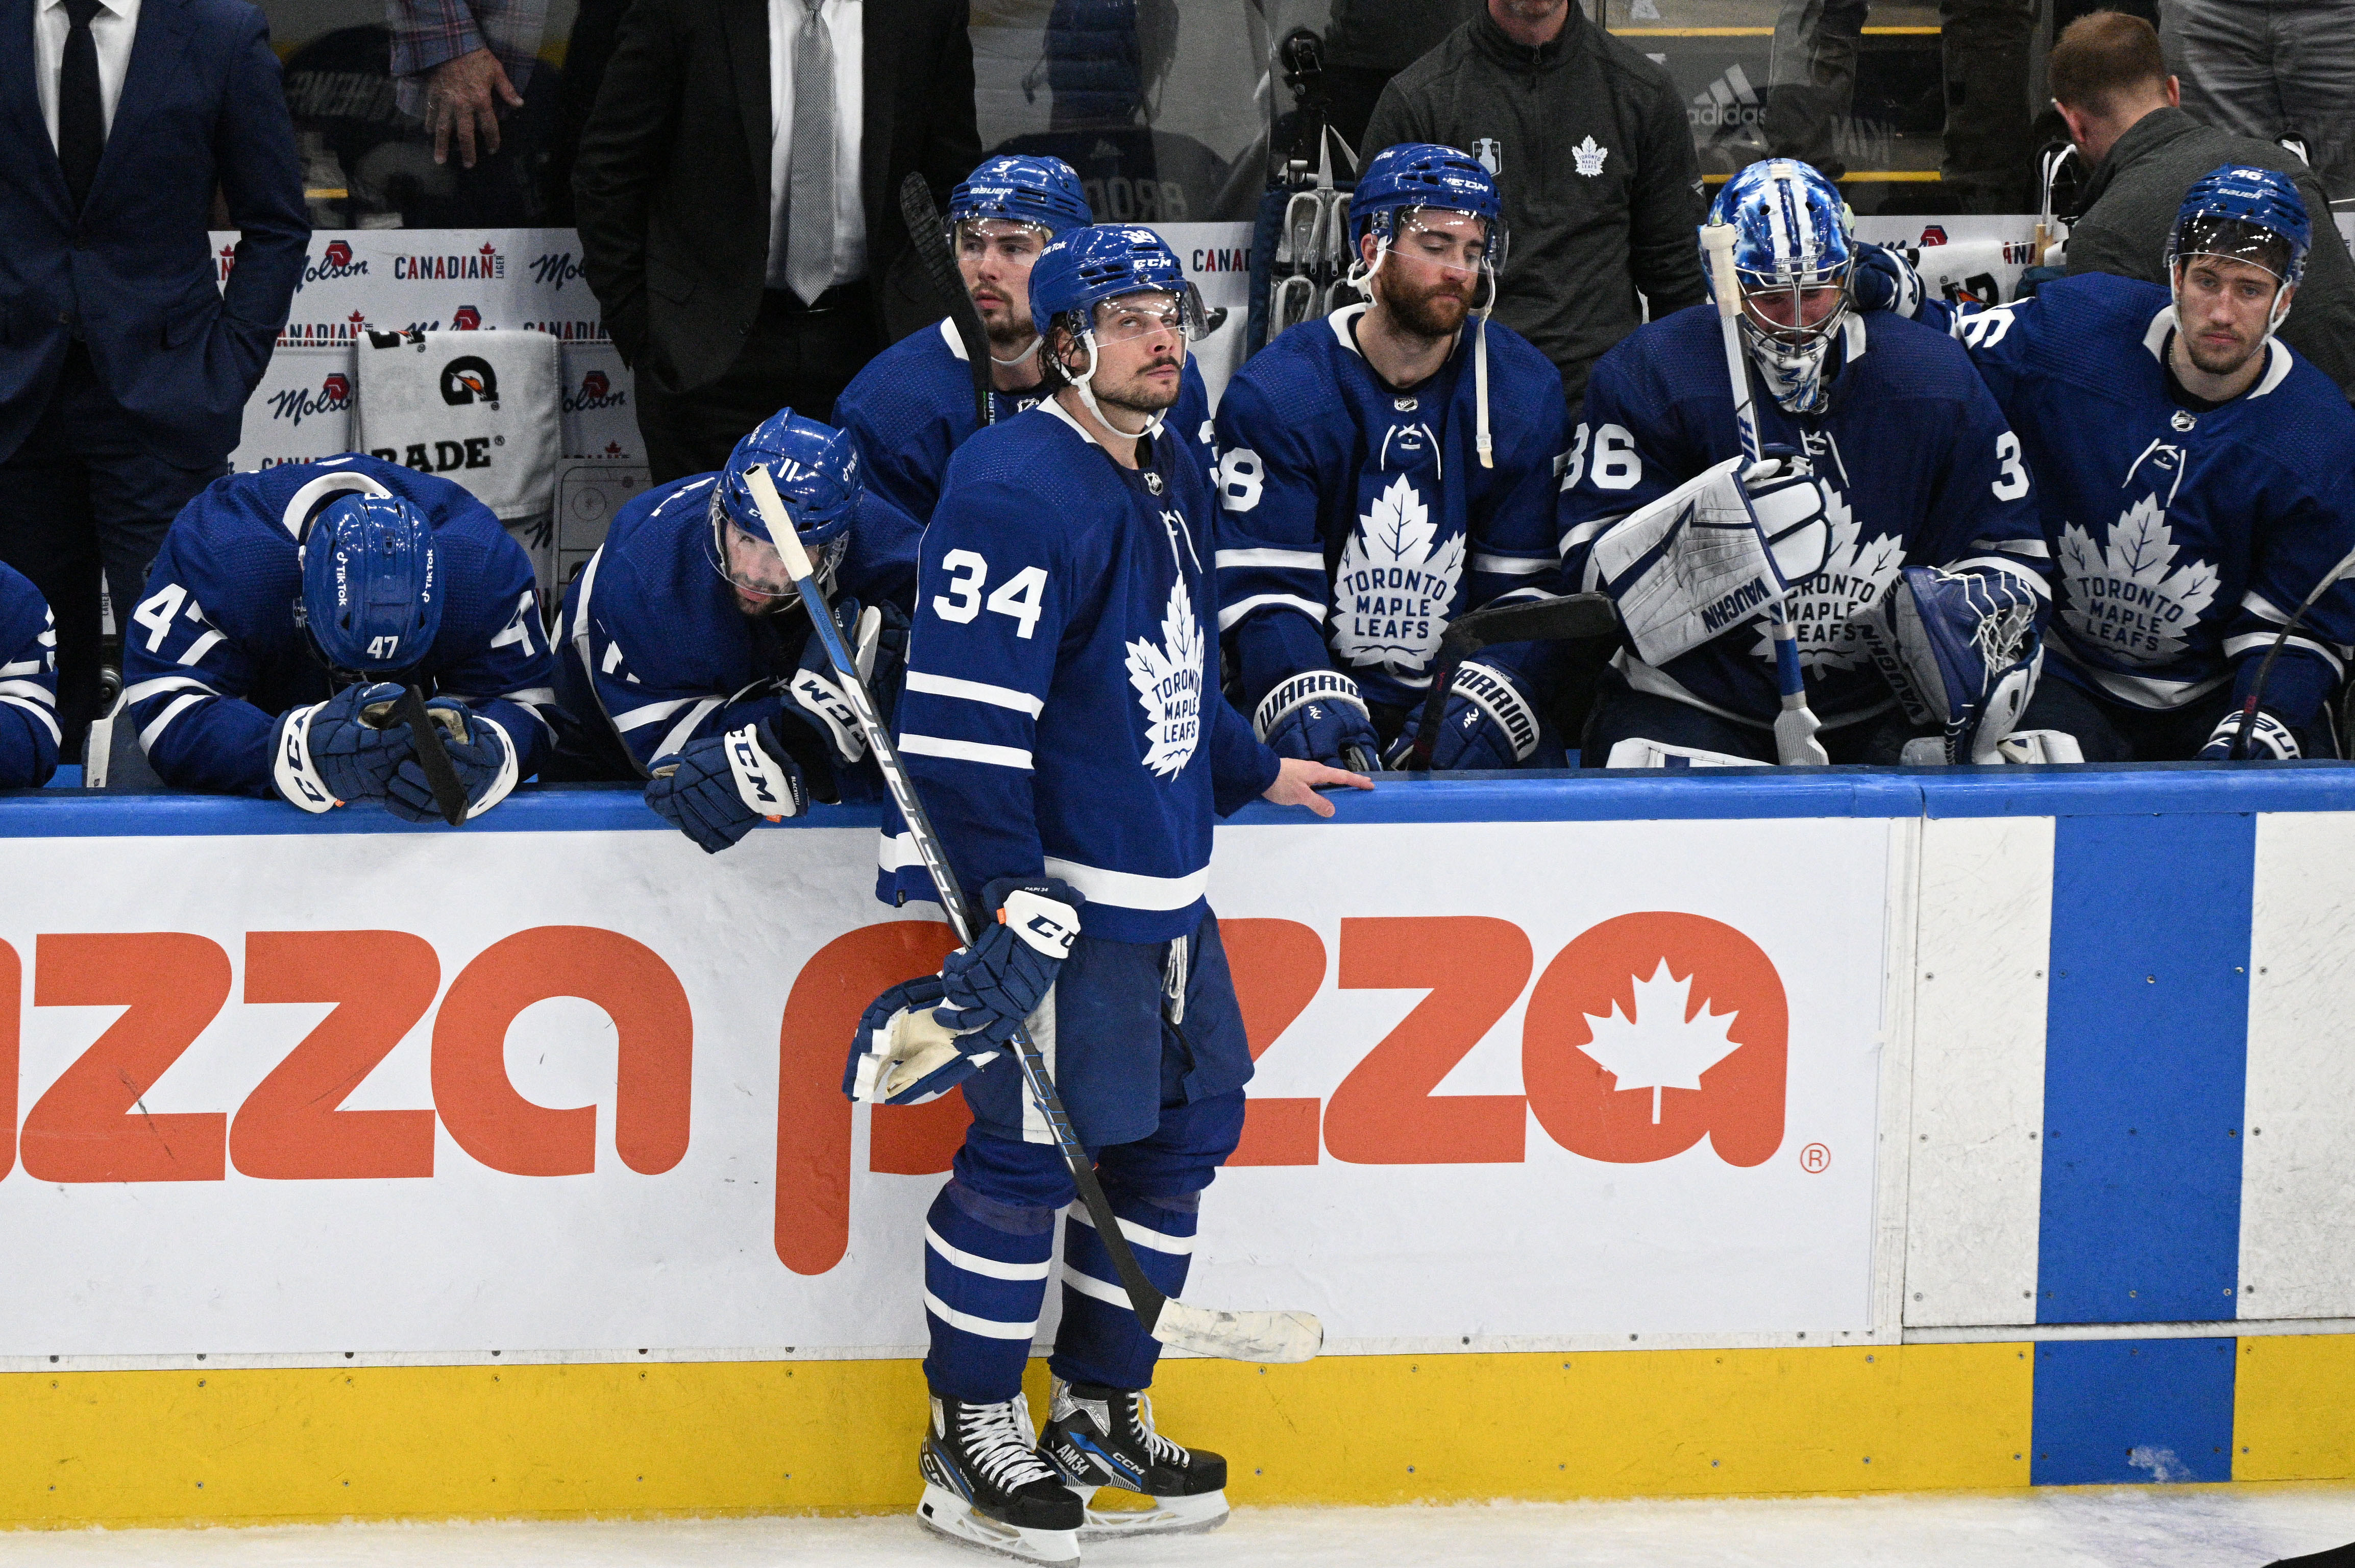 Long overdue': Leafs, Canadiens meet again in playoffs – The Oakland Press